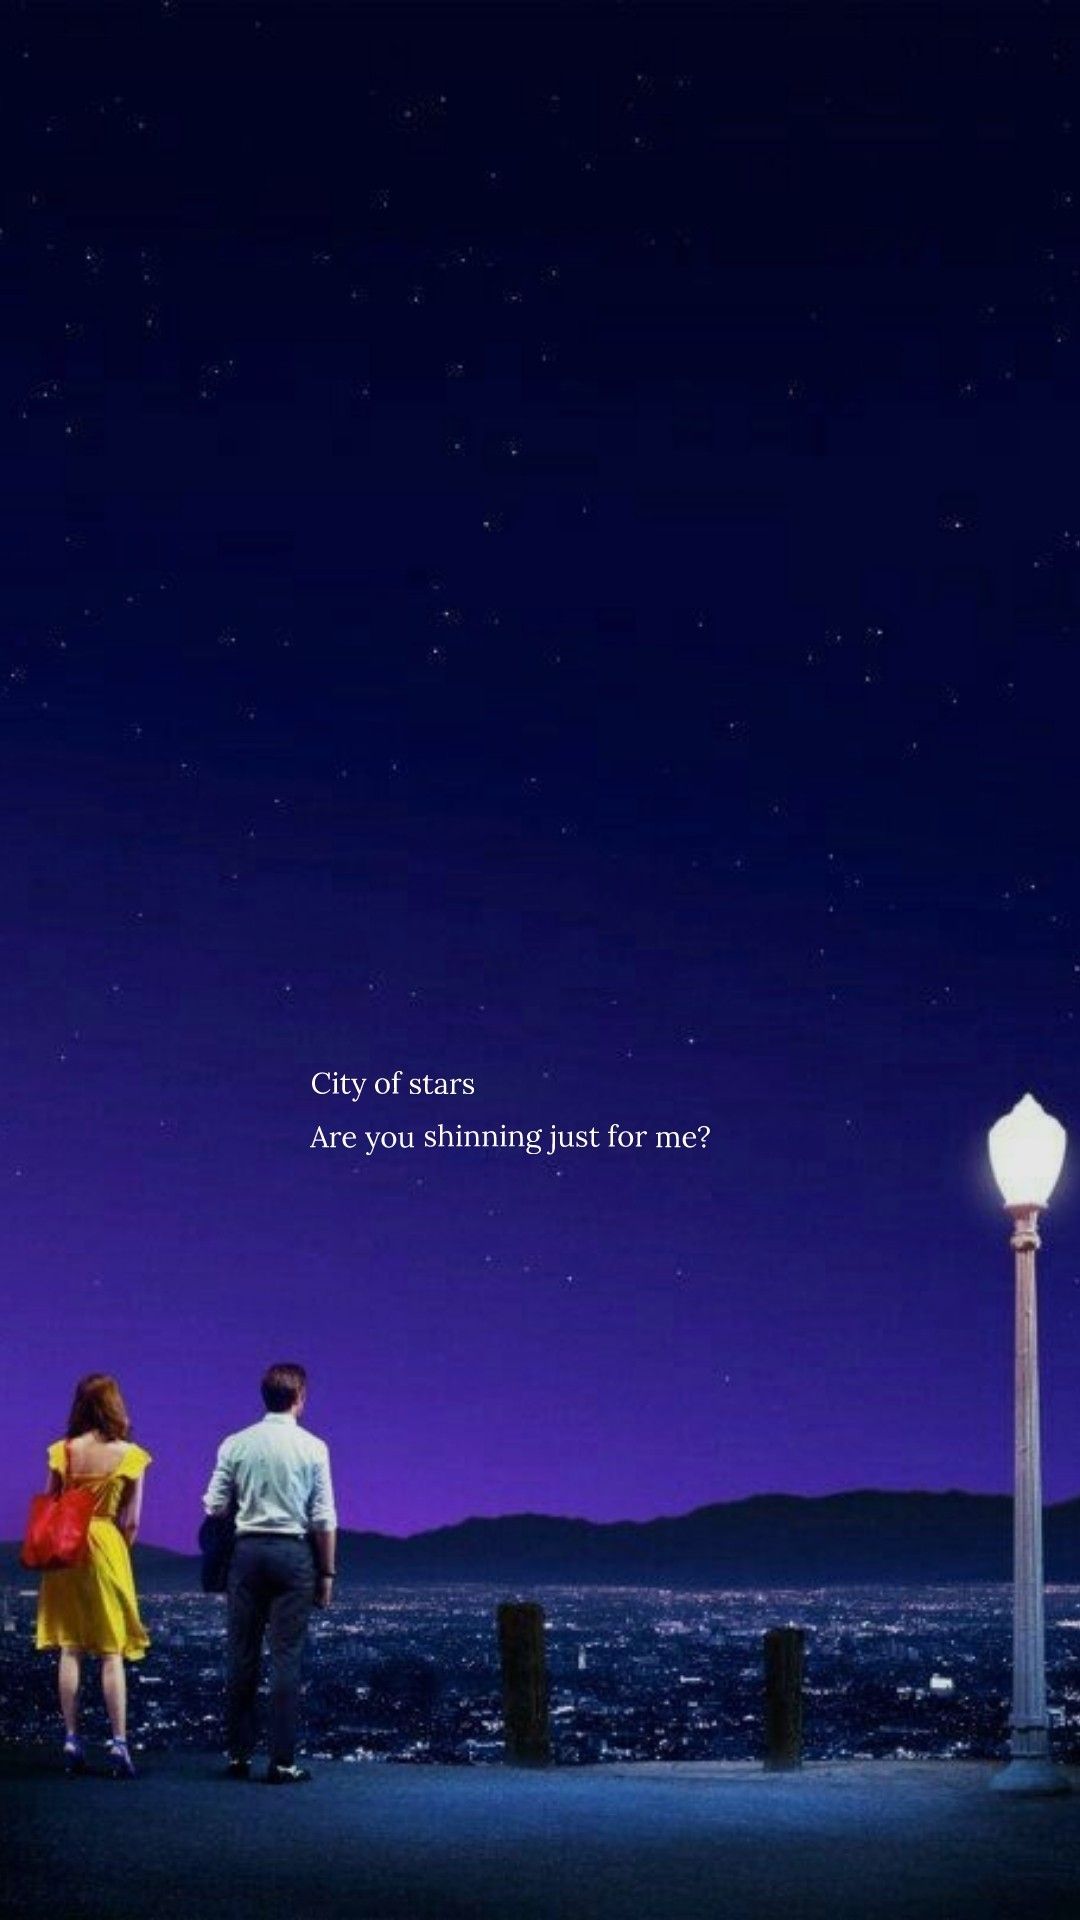 Download A City With A Lot Of Stars On It Wallpaper